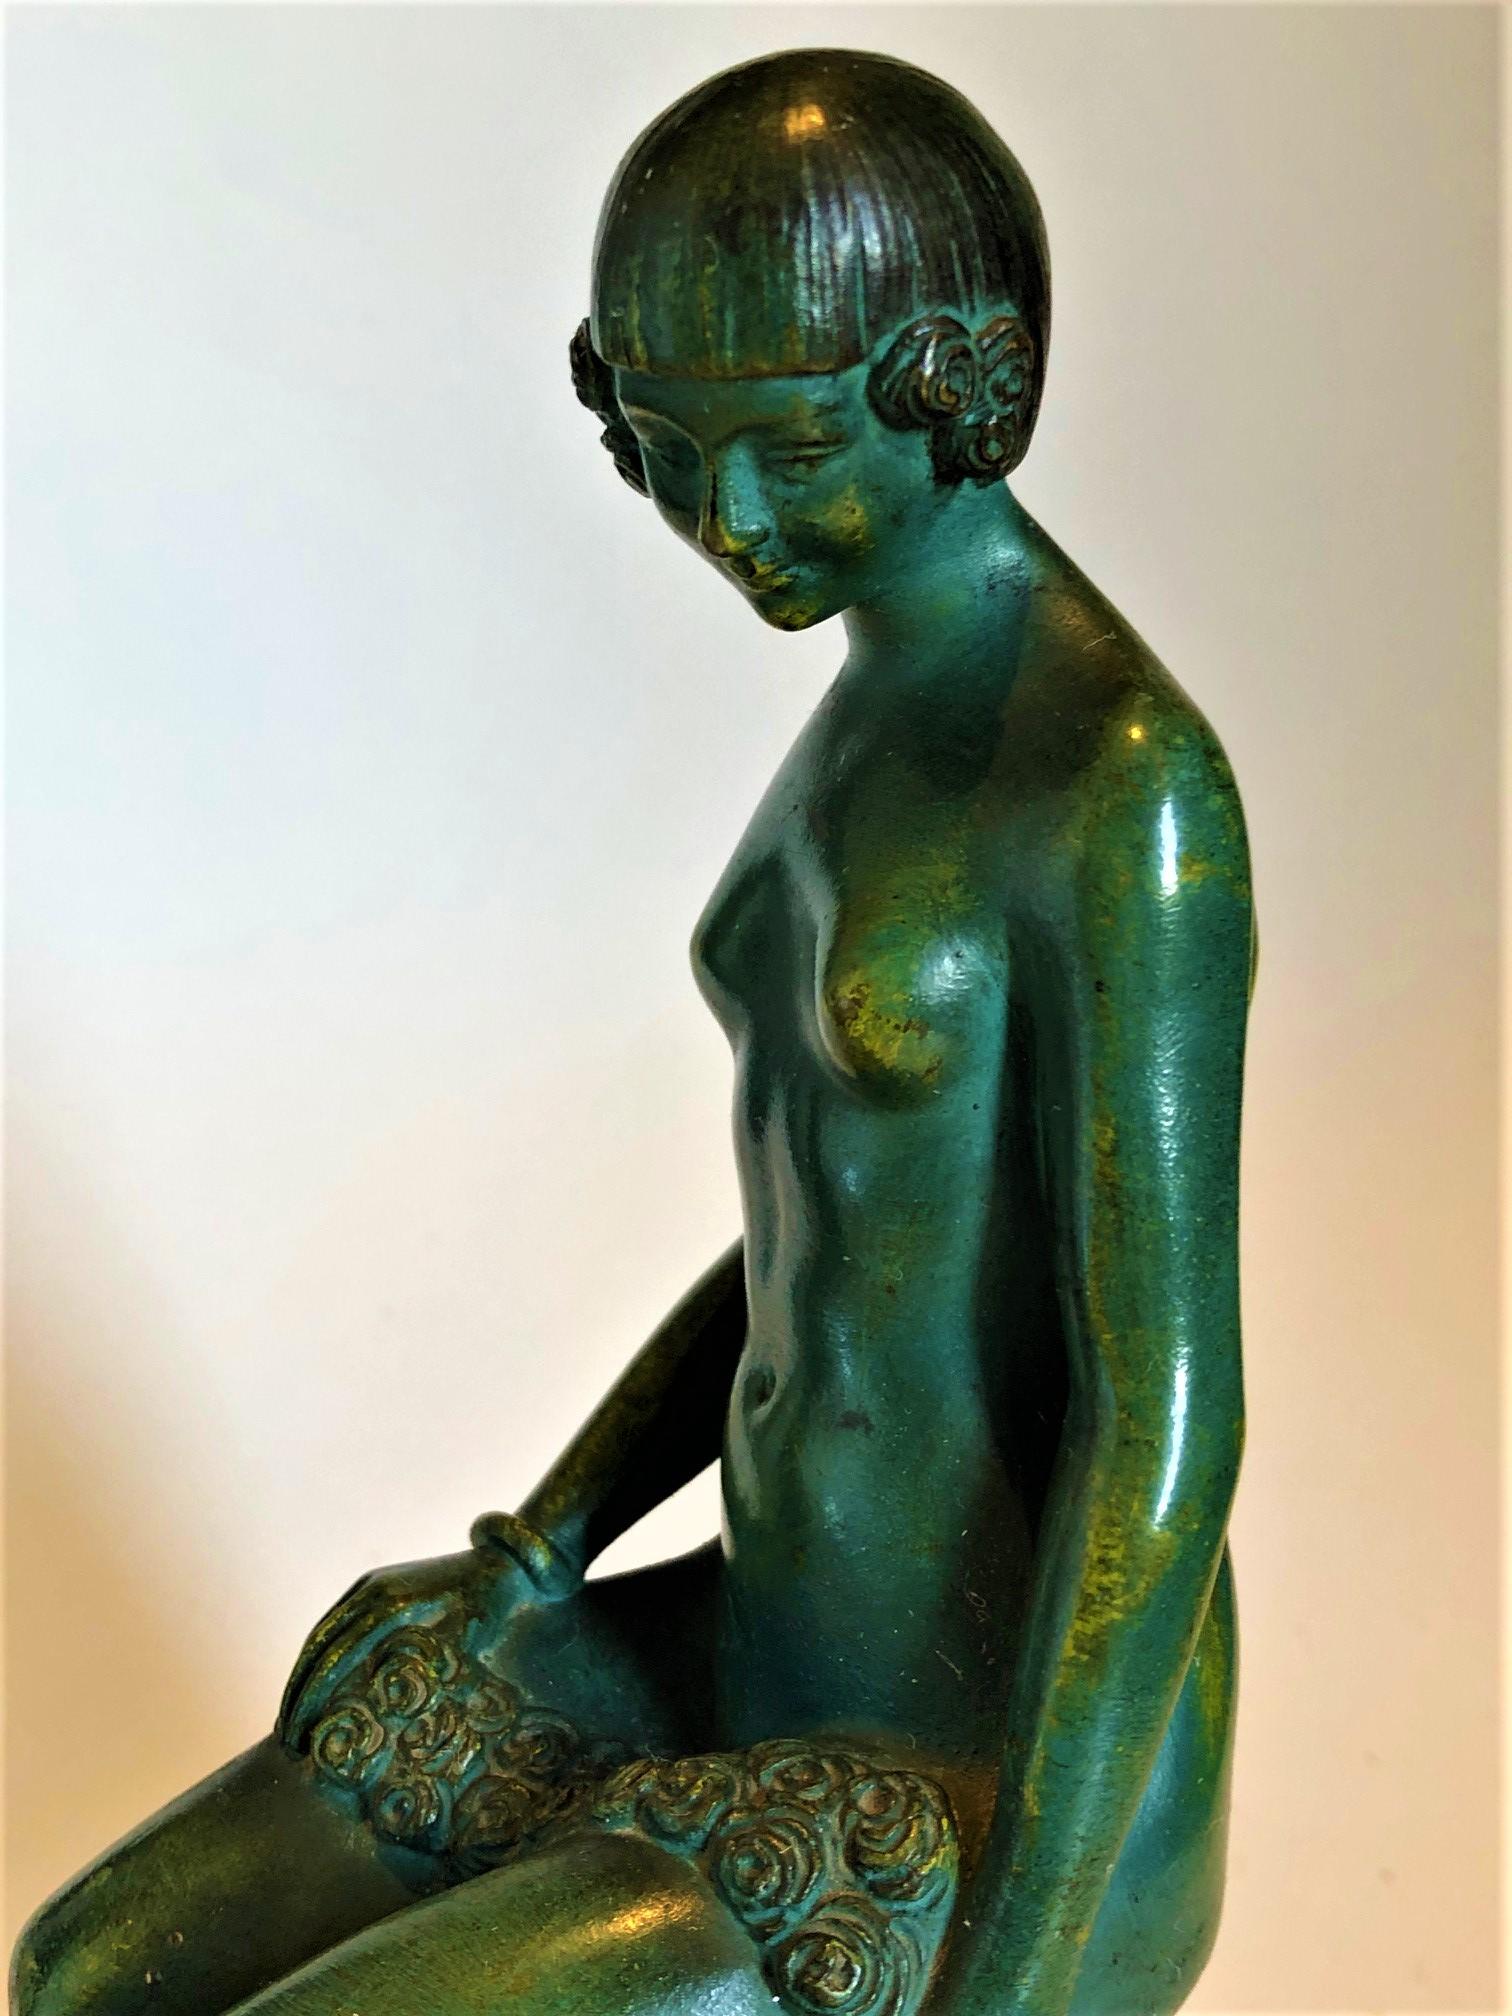 Polychromed Art Deco Nude Erotic Woman Bronze Bookends, c. France 1925, Signed Scribe